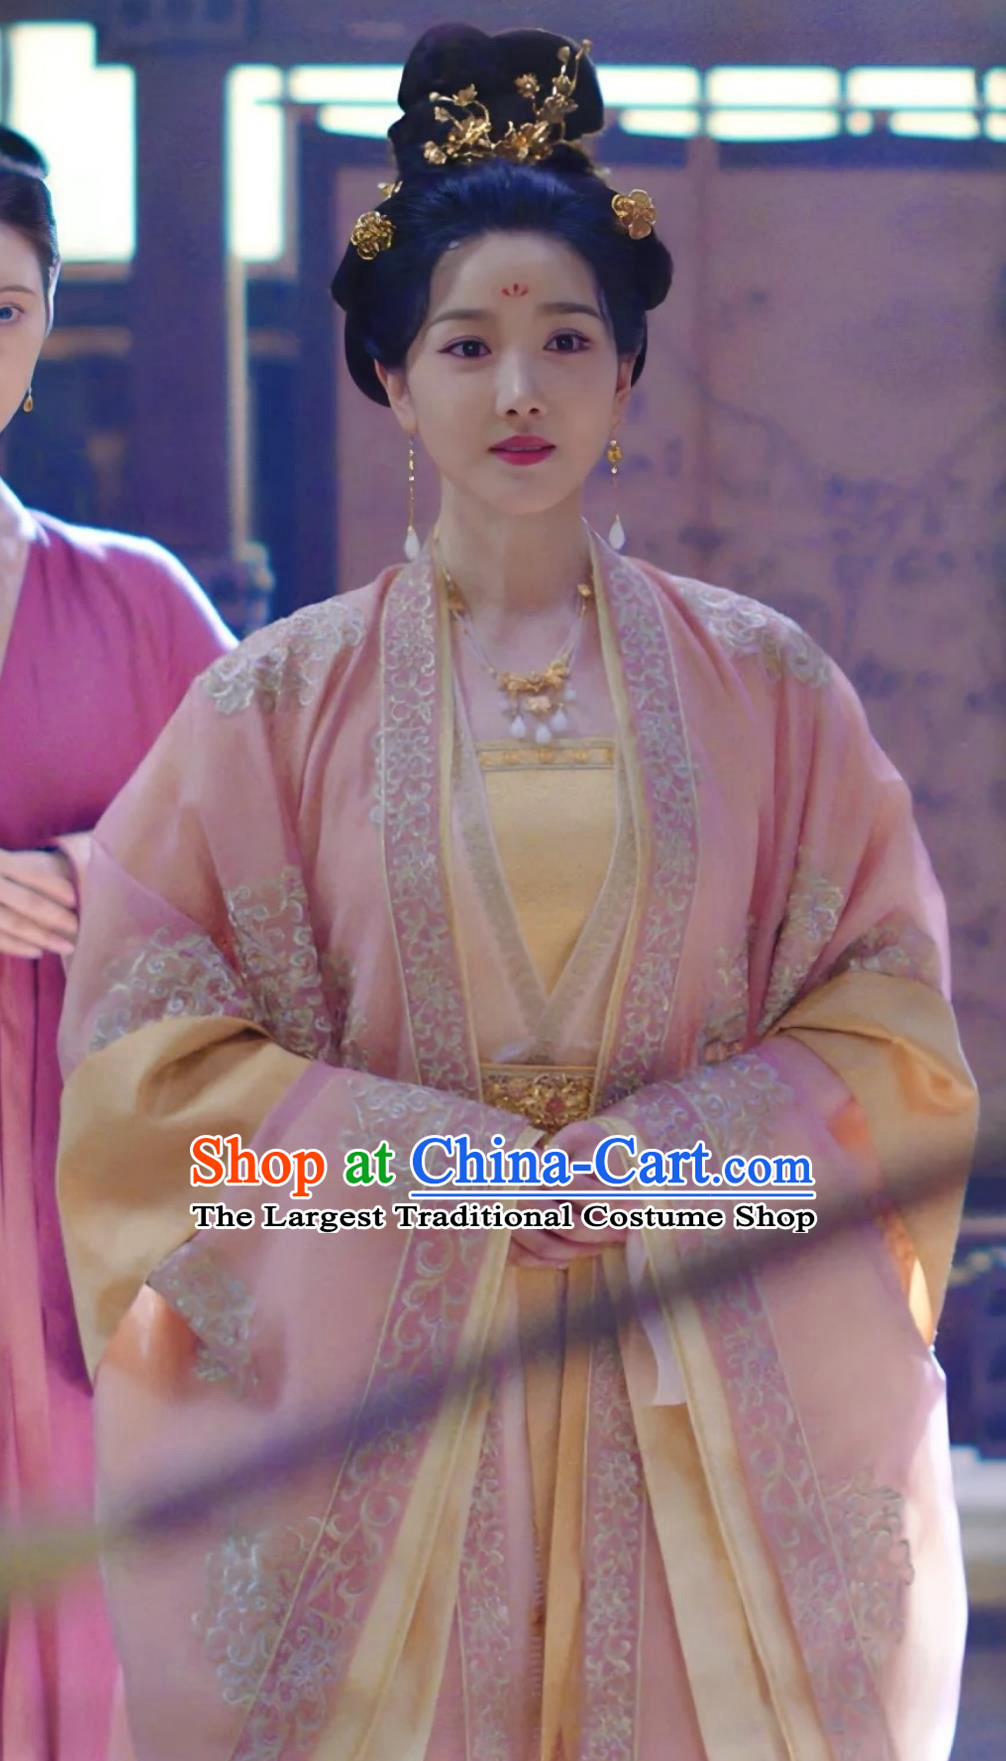 2023 Wuxia TV Series A Journey To Love Dance Imperial Consort Chu Dress  Ancient China Royal Woman Costumes